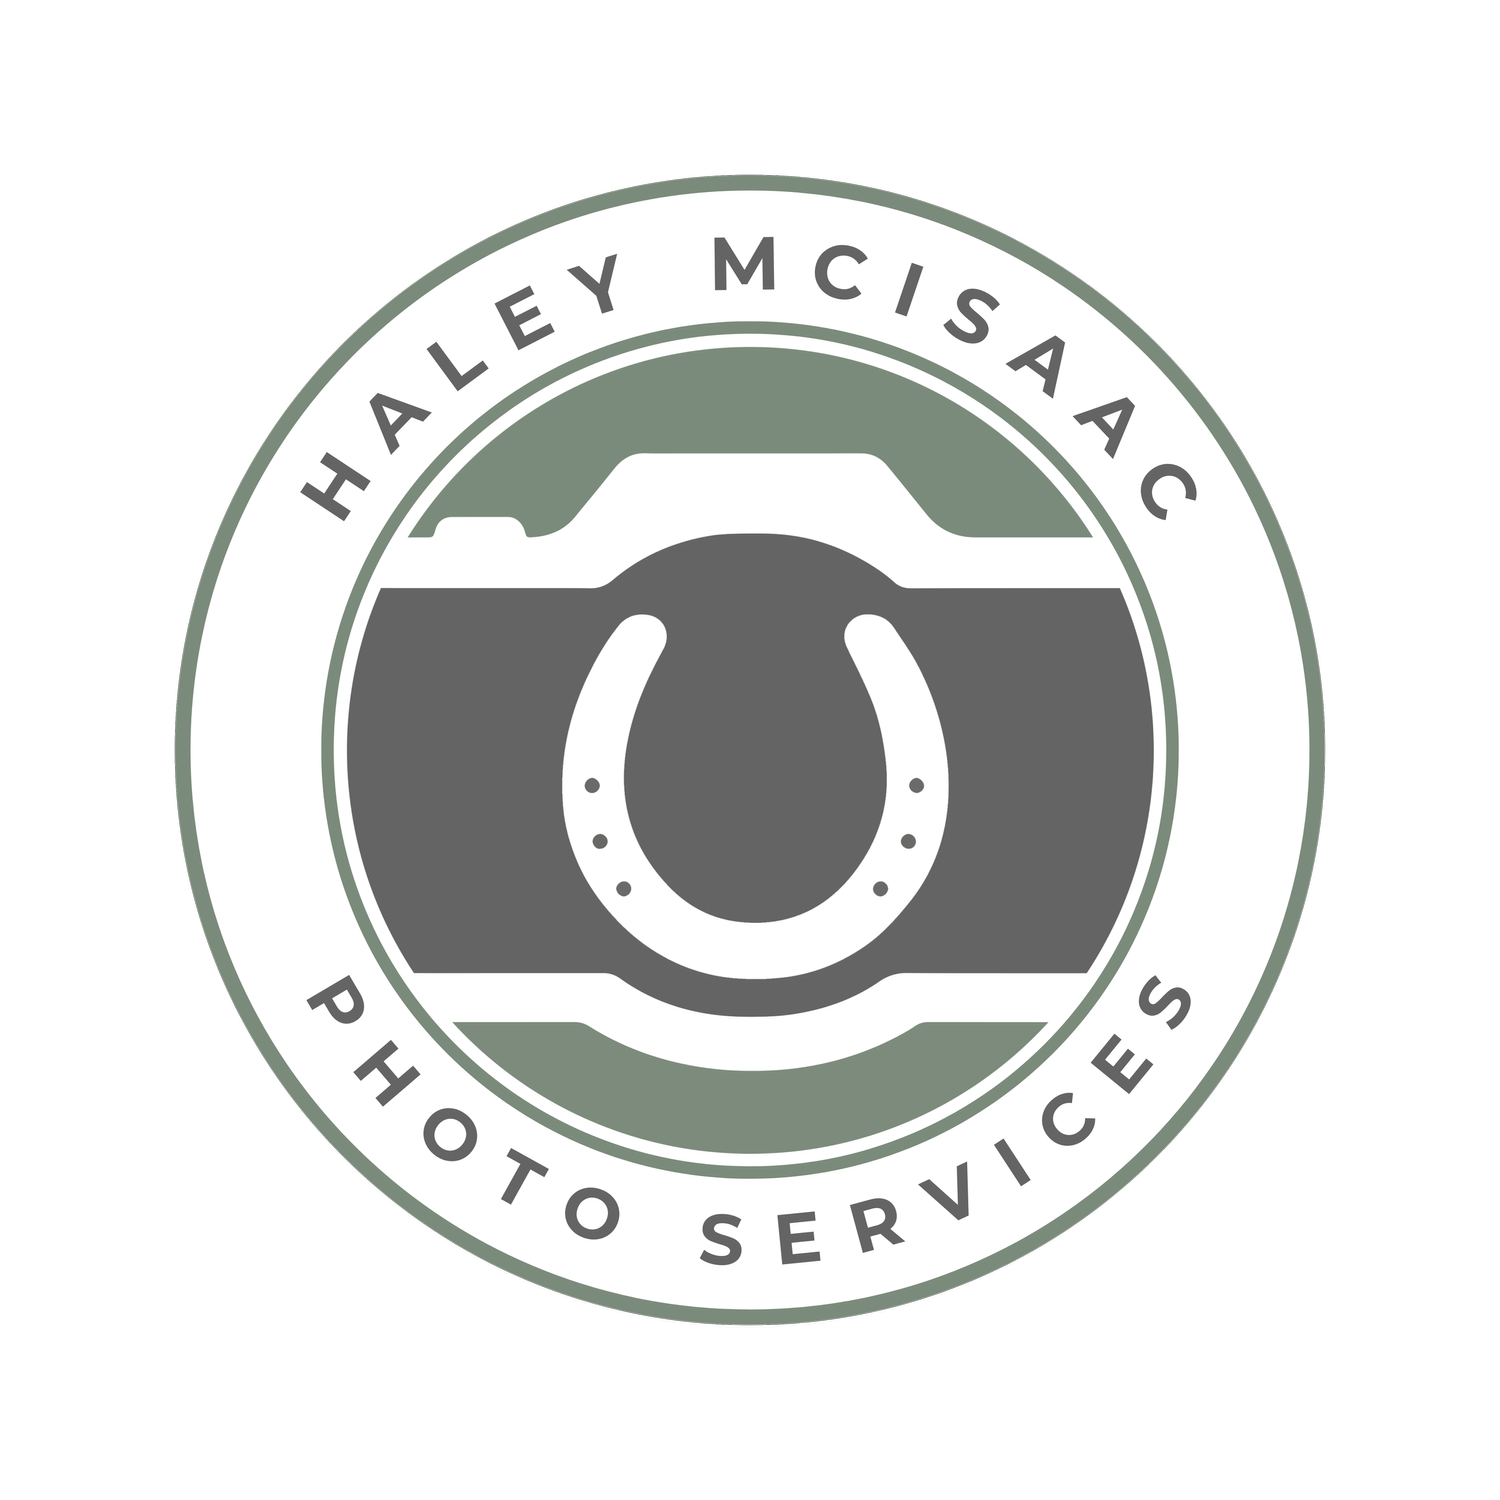 Haley McIsaac Photo Services